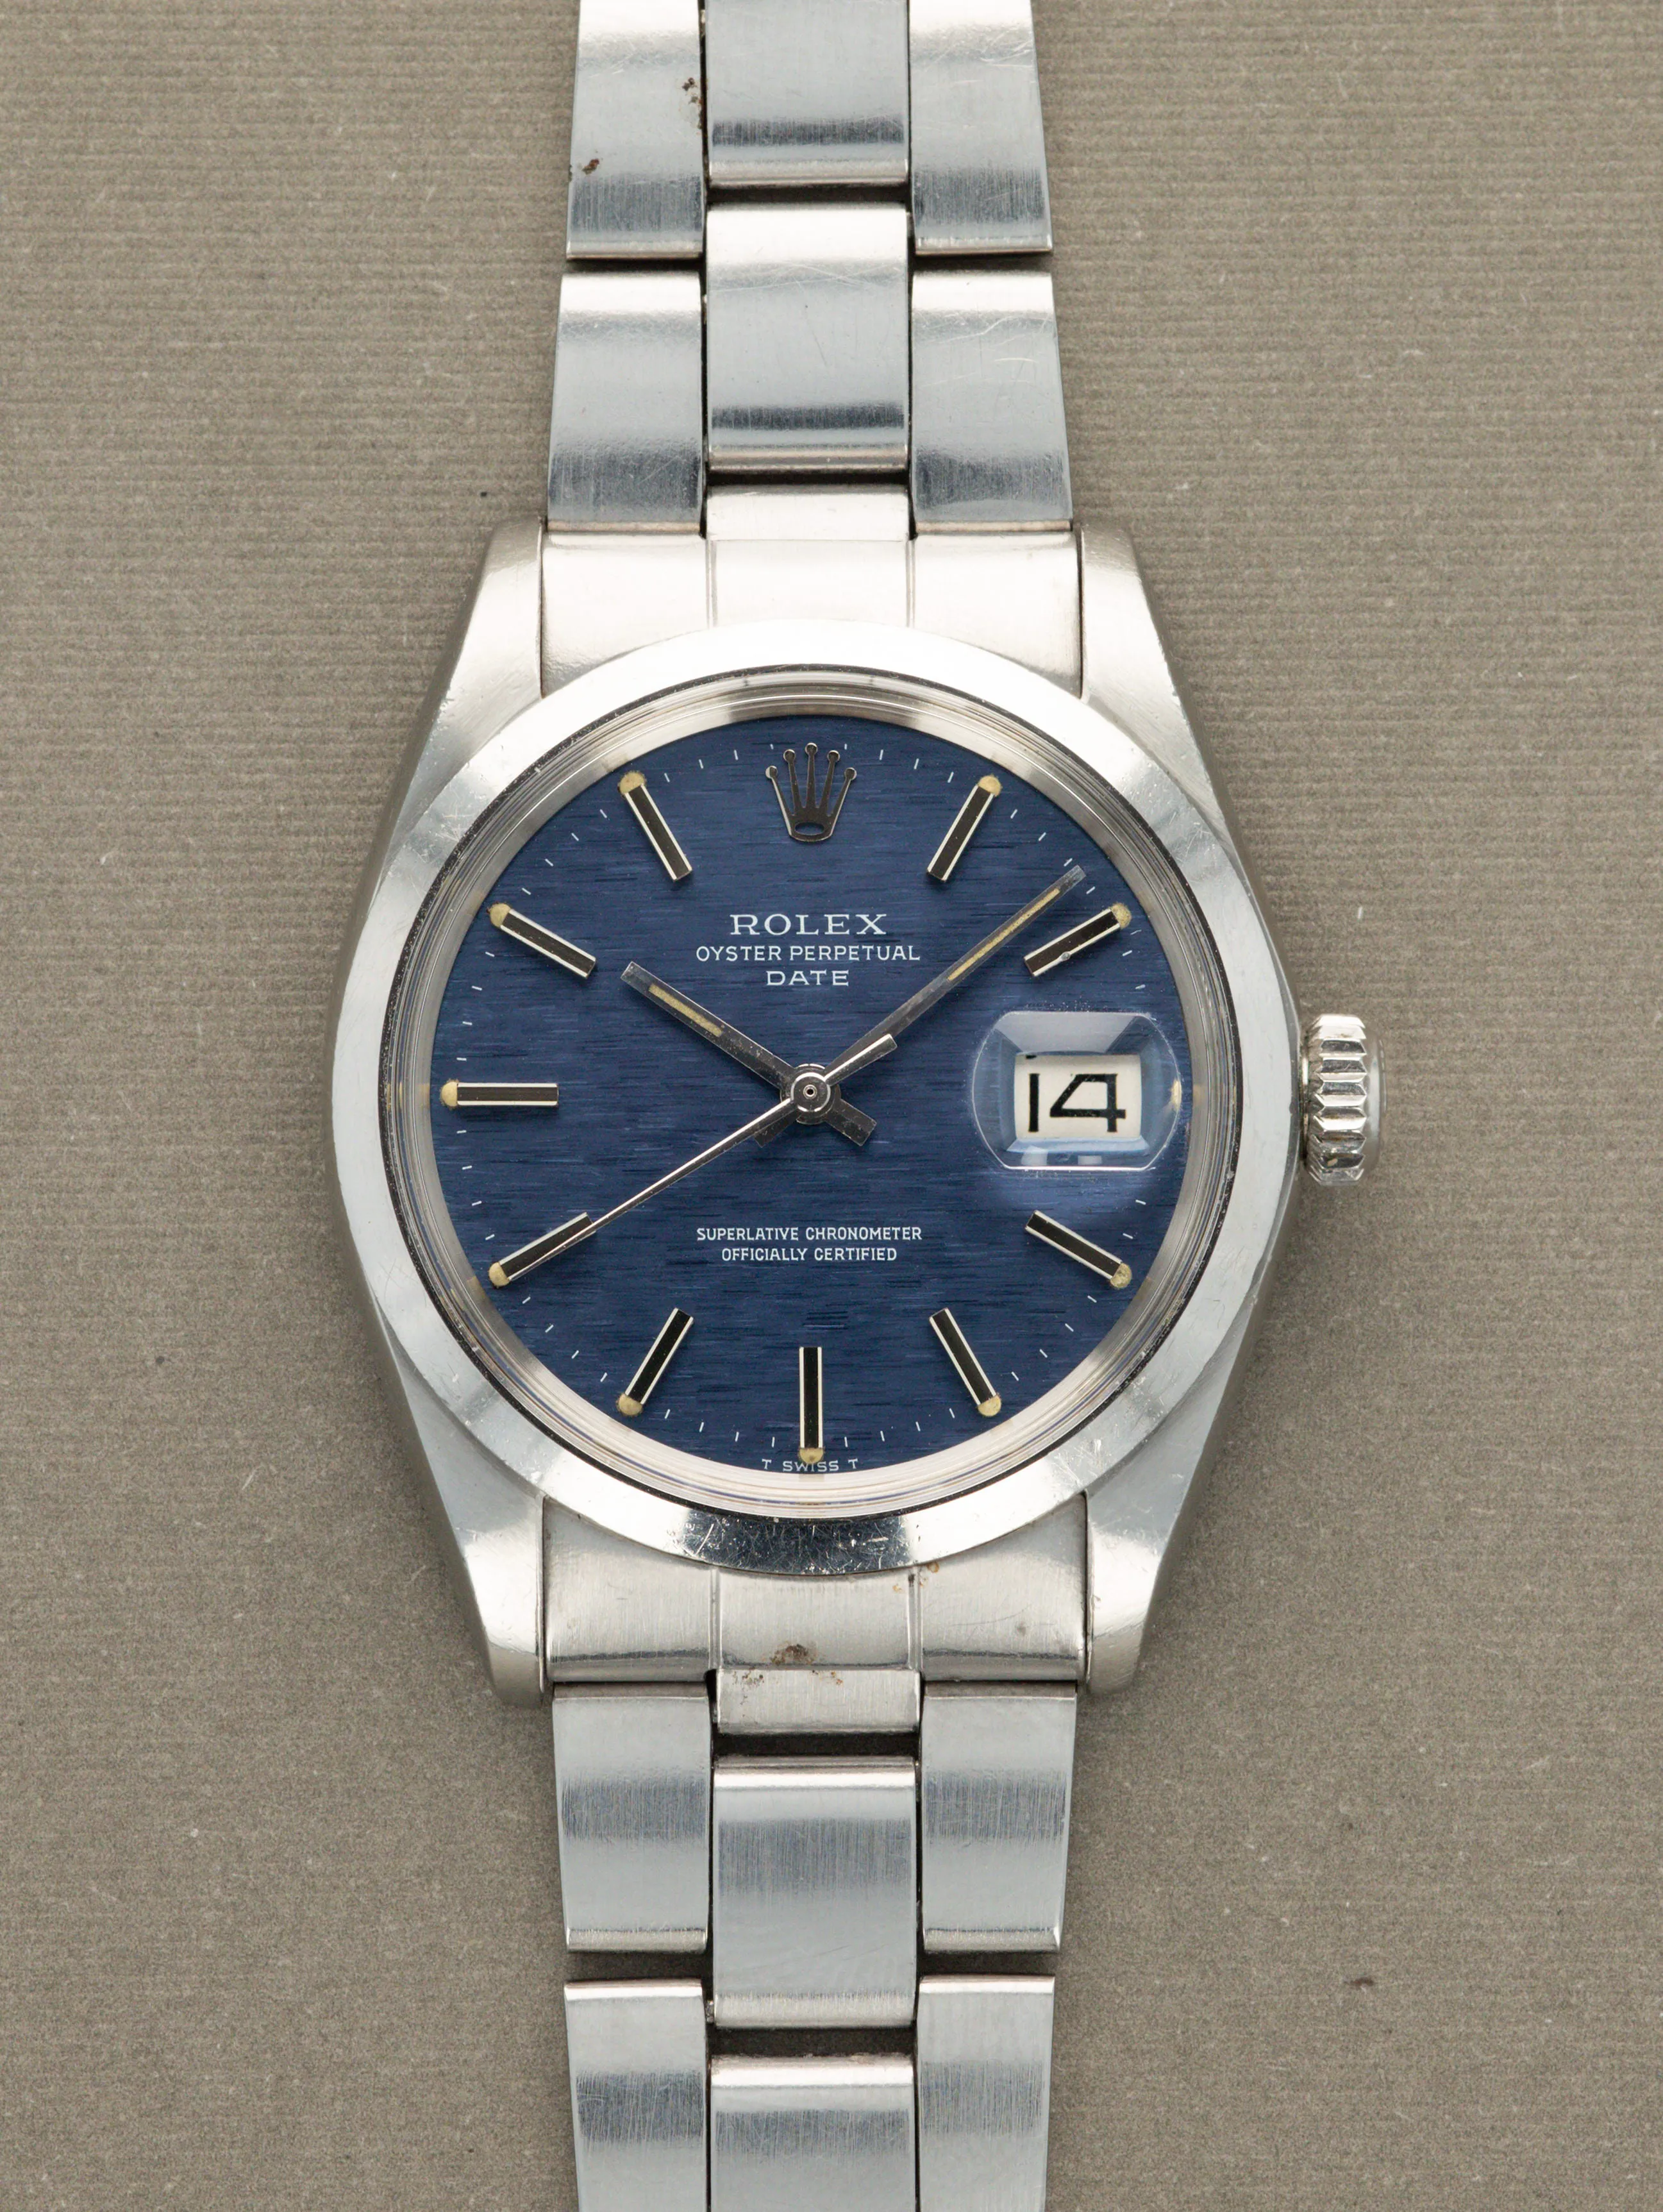 Rolex Oyster Perpetual Date 1500 nullmm Stainless steel Blue